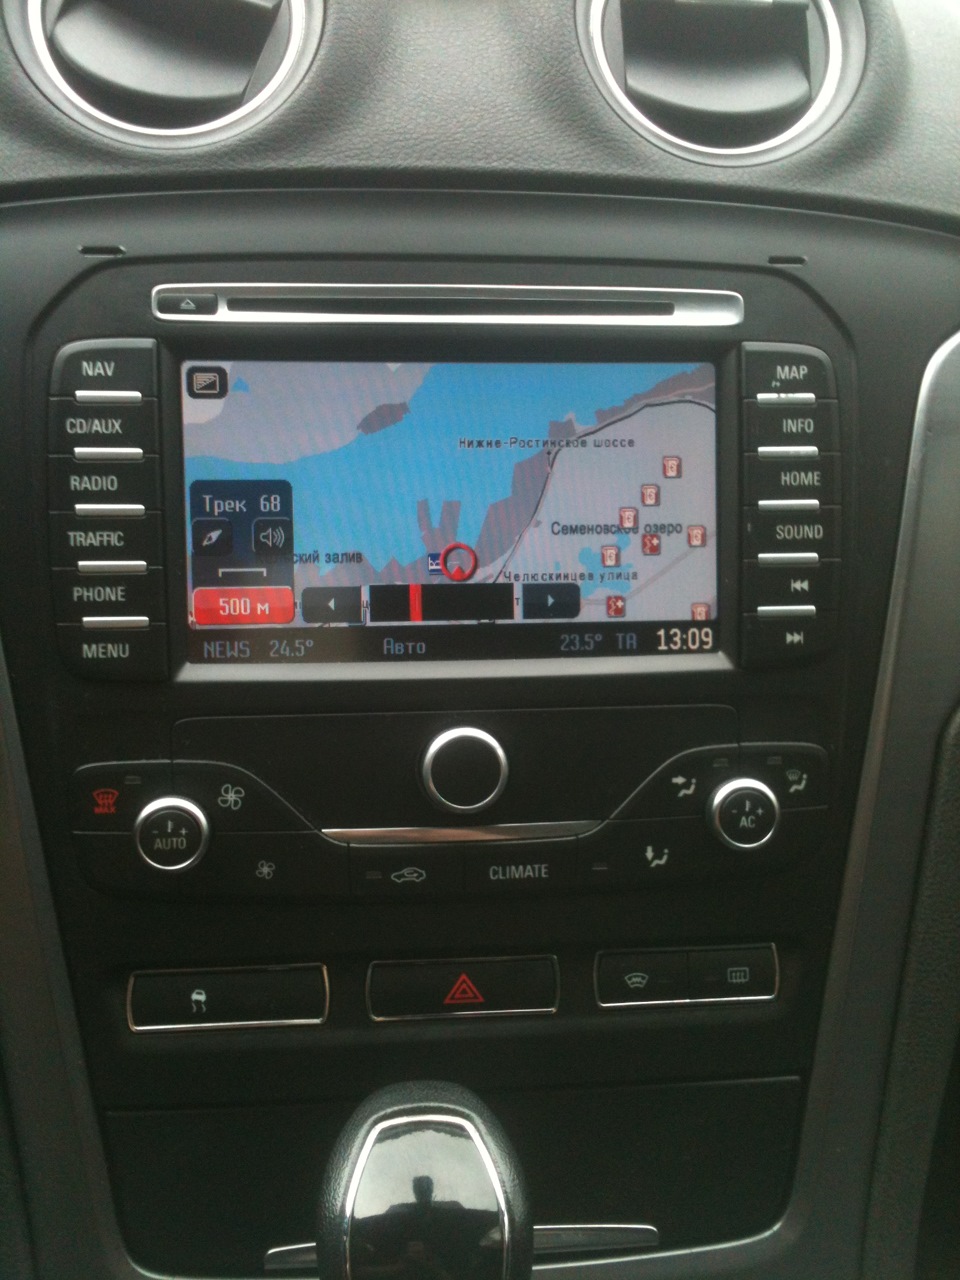 Ford Mondeo (UK) DVD navigation - how to get the DVD out ...